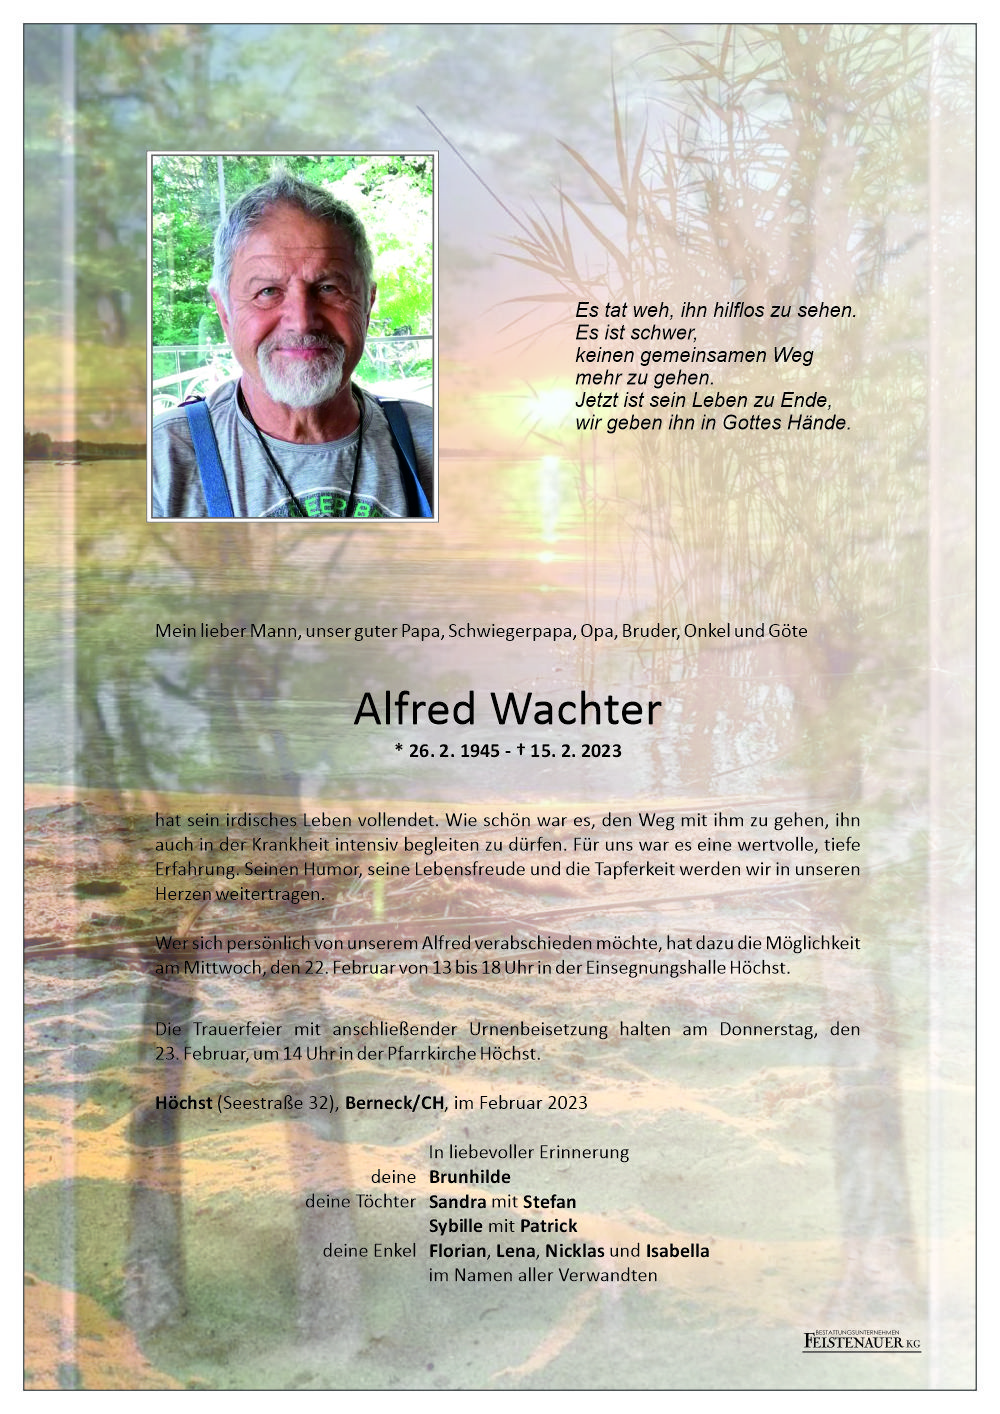 Alfred Wachter